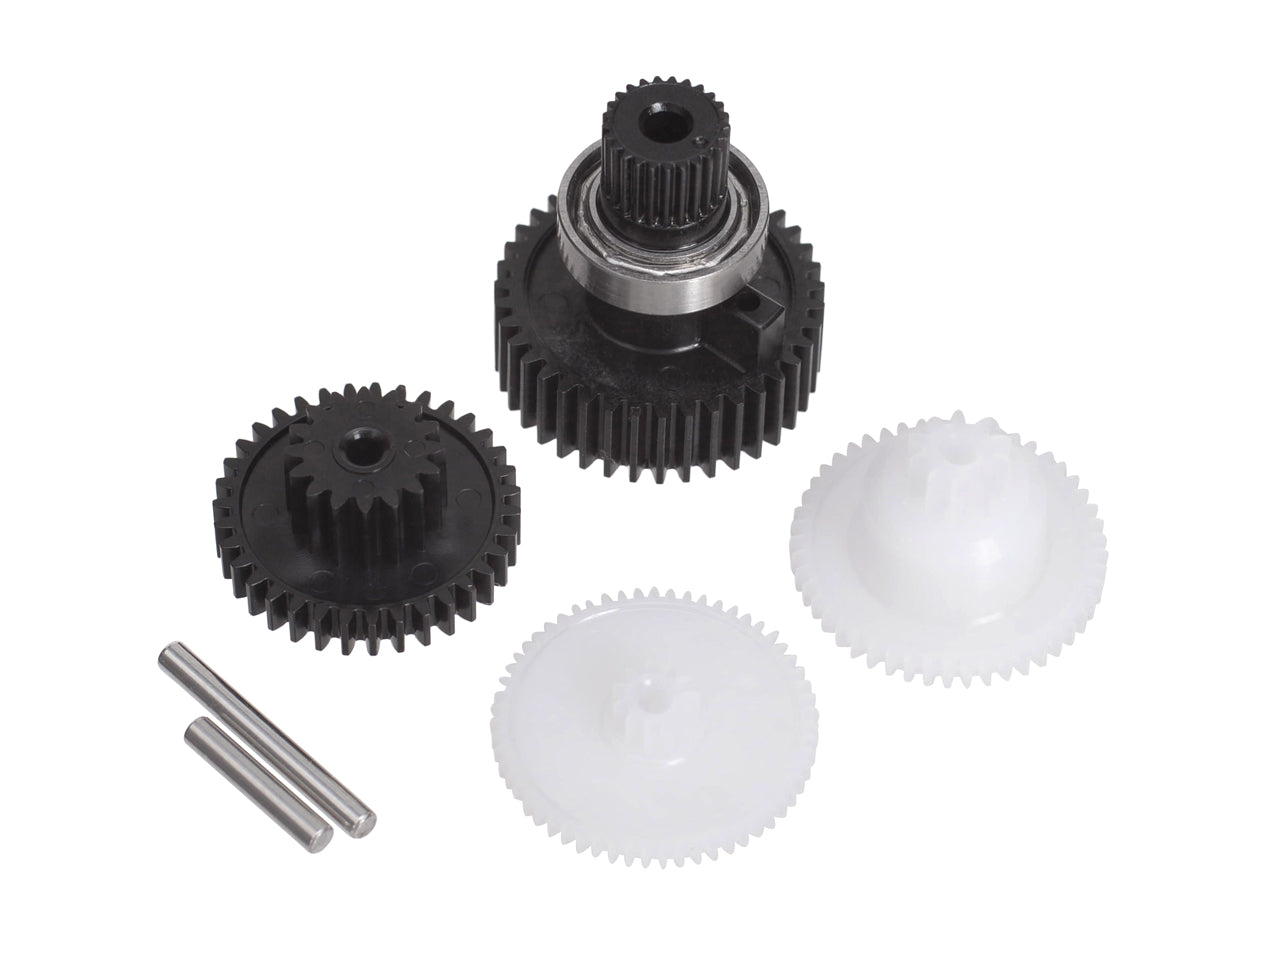 G0991 Spare gear set for GDS-0812  (2 BBs, 2 shafts included)